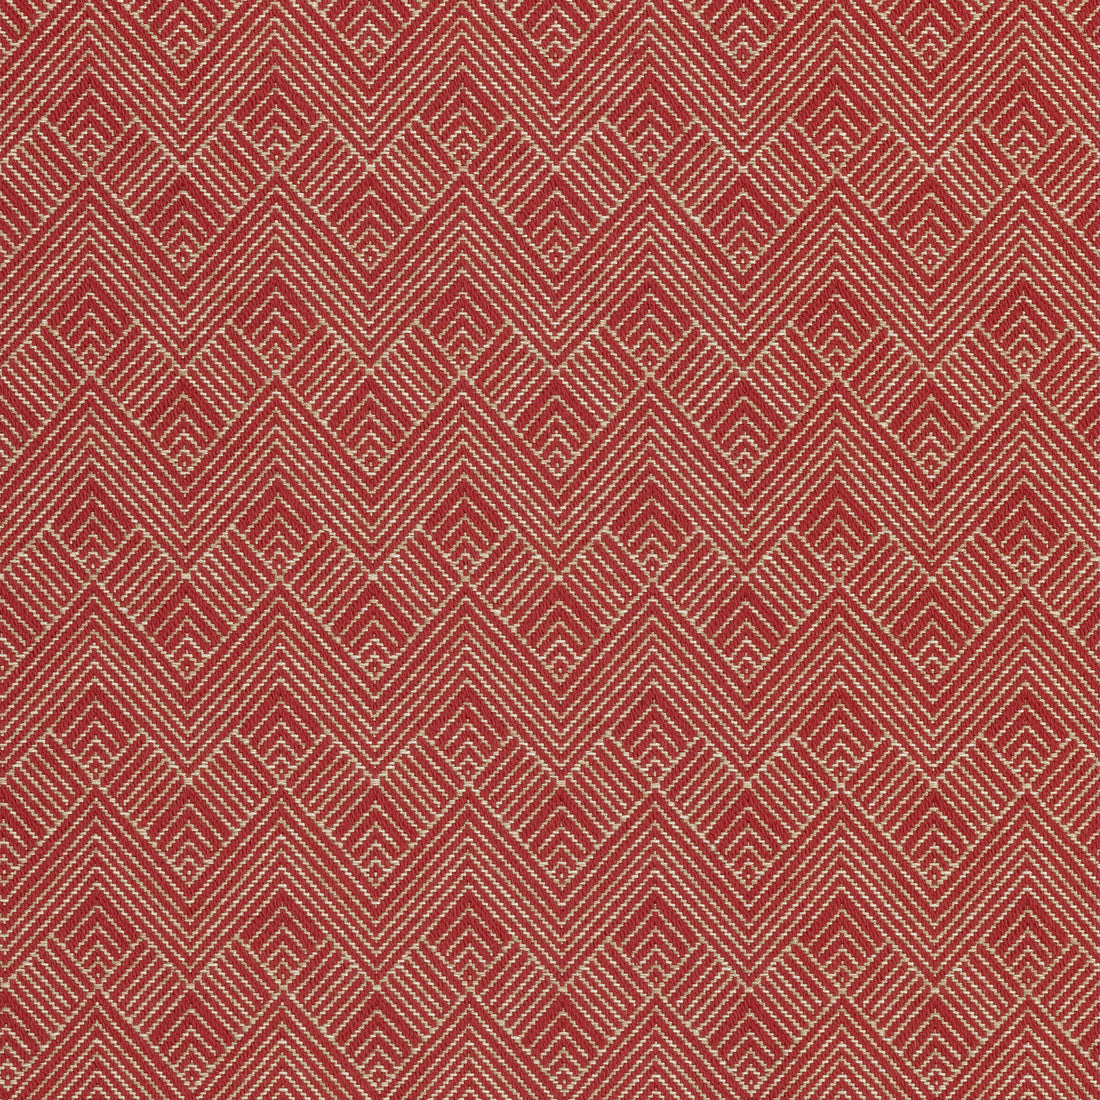 Maddox fabric in cinnabar color - pattern number W73326 - by Thibaut in the Nomad collection